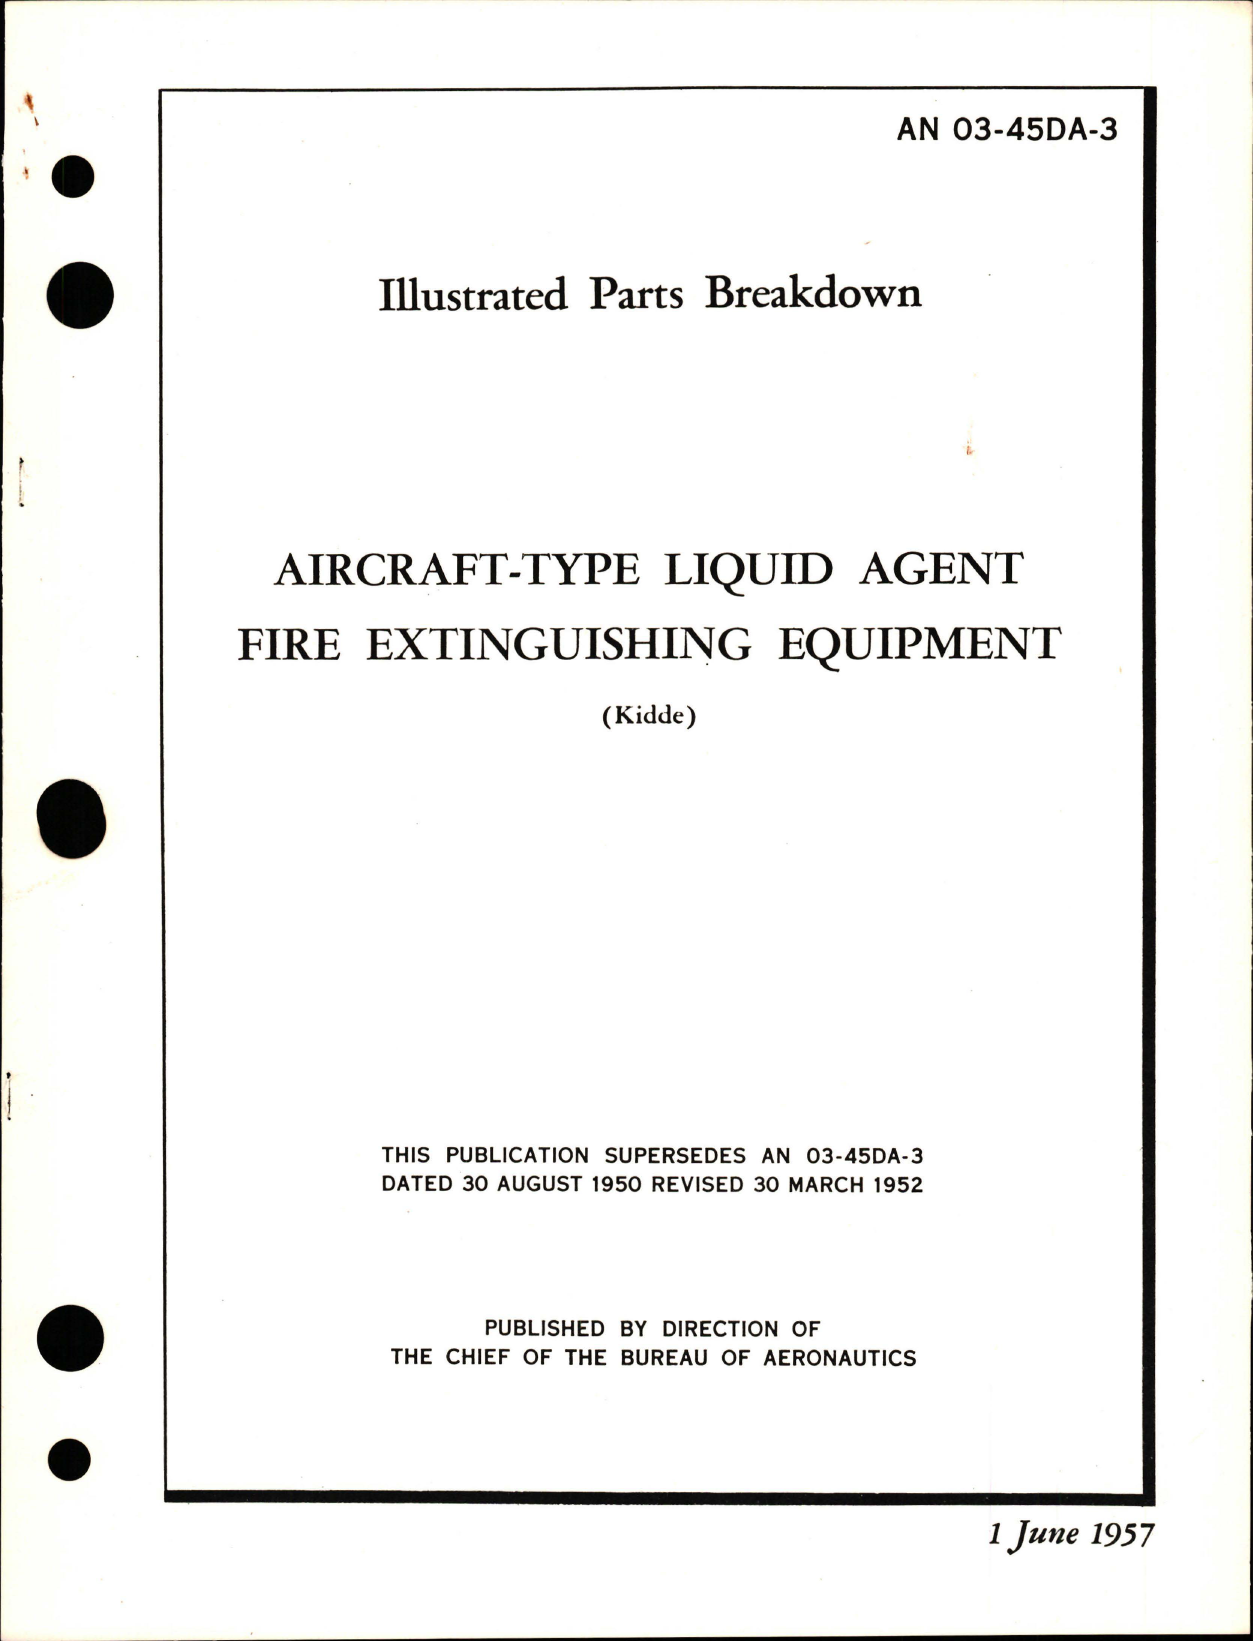 Sample page 1 from AirCorps Library document: Illustrated Parts Breakdown for Aircraft-Type Liquid Agent Fire Extinguishing Equipment 